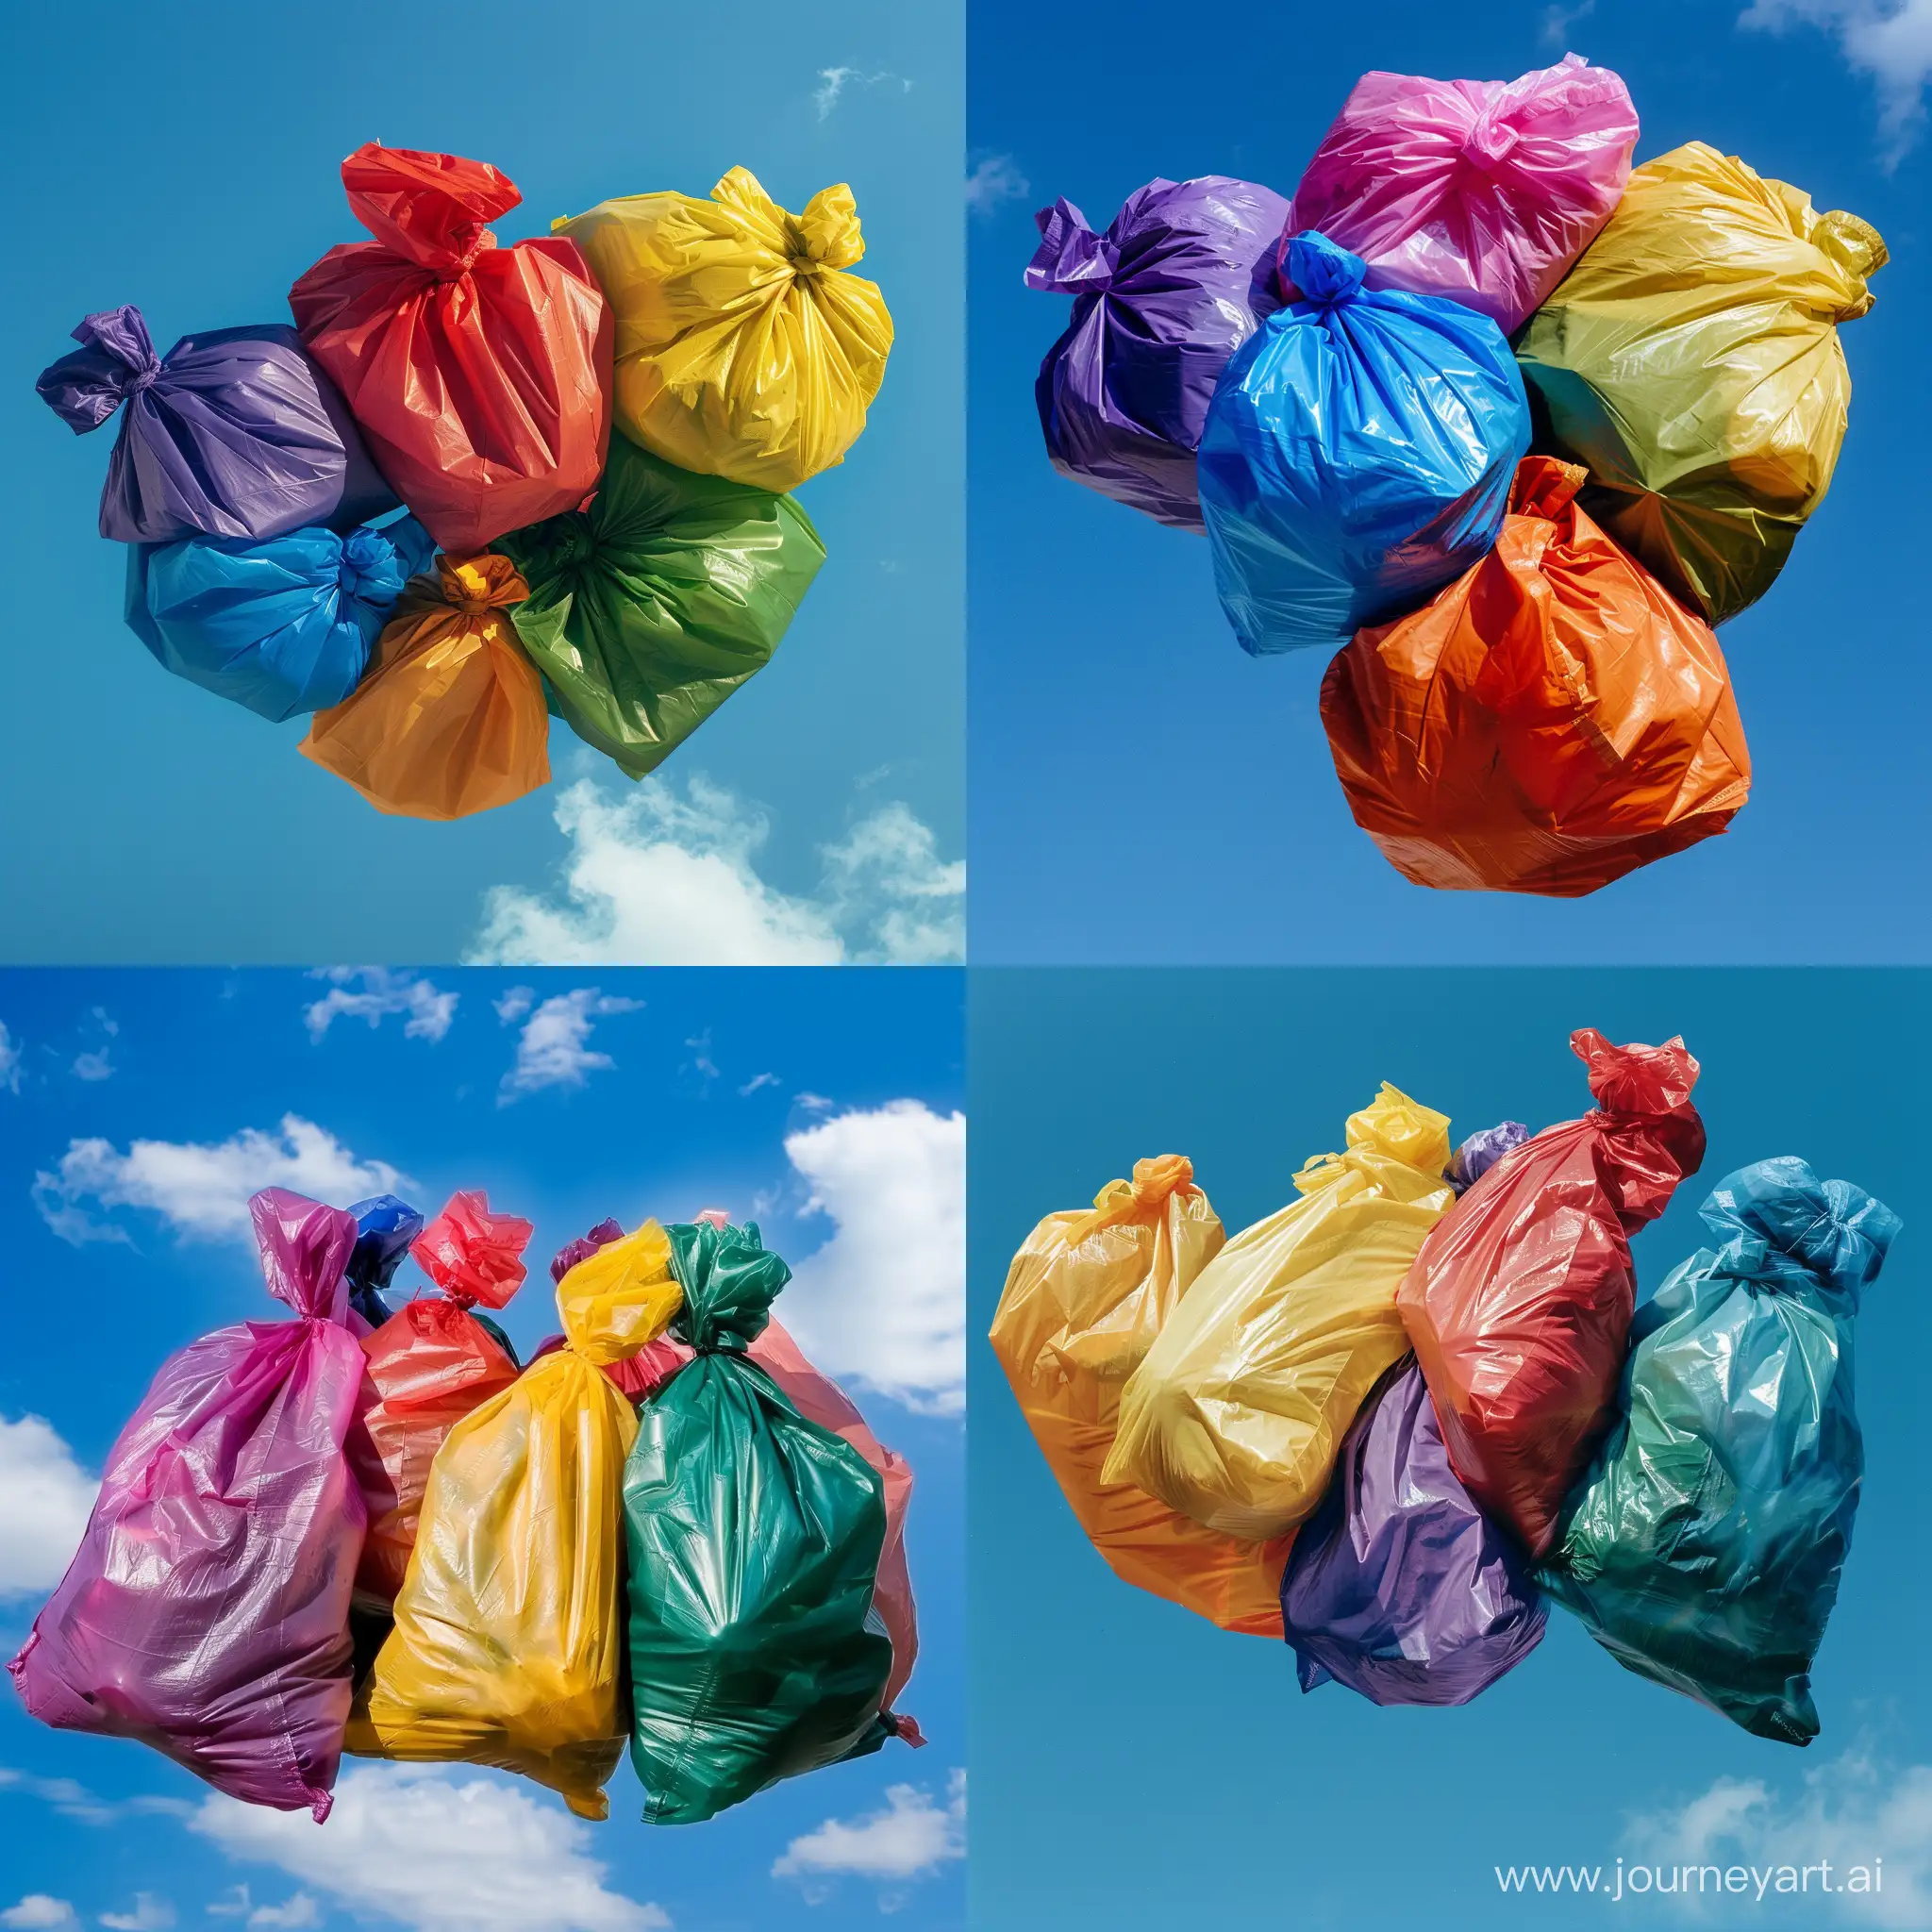 Vivid-Bunch-of-Colored-Garbage-Bags-Floating-in-Blue-Sky